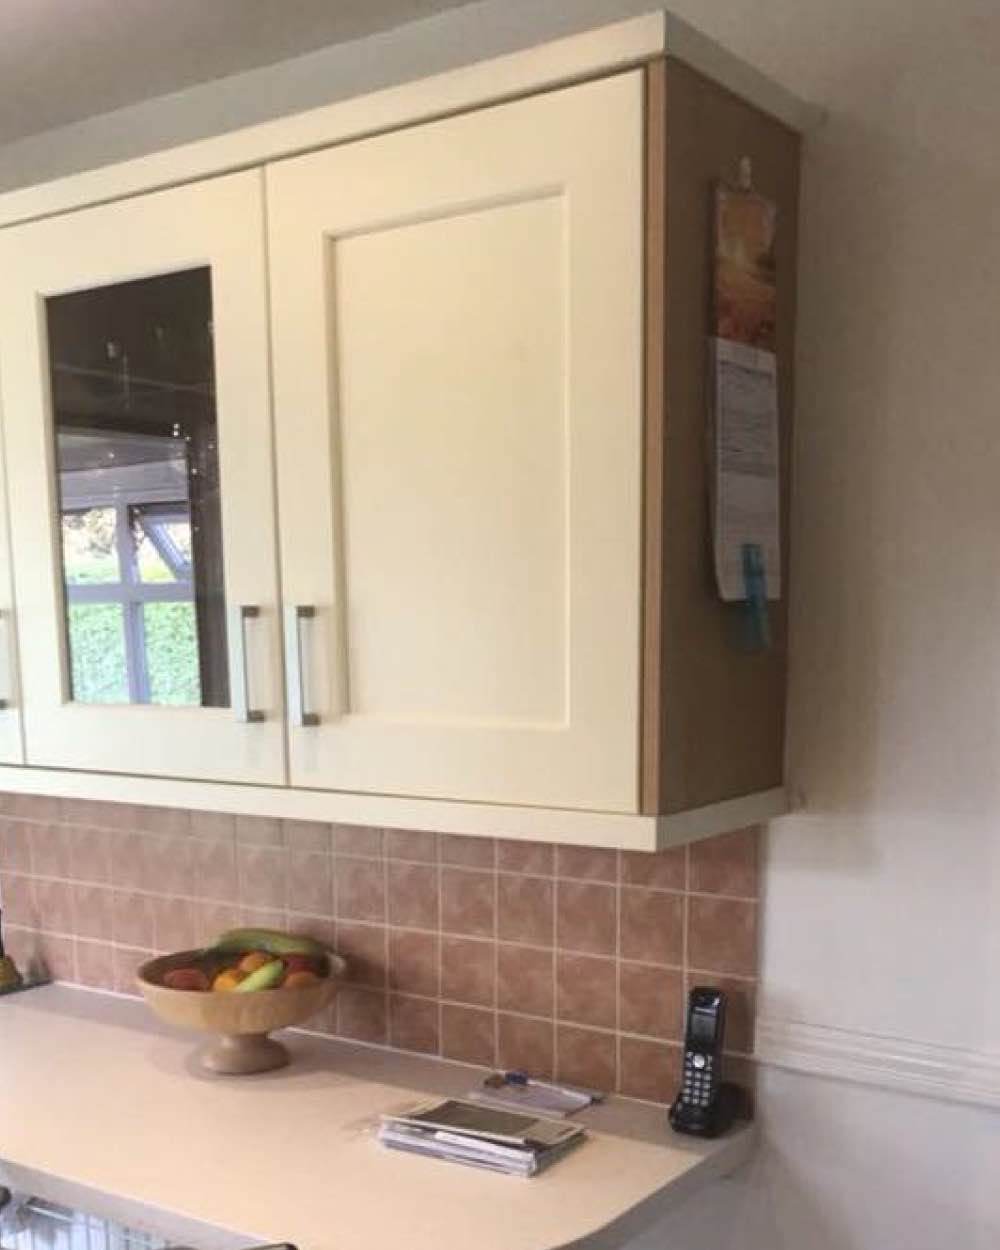 Kitchen installation Project in Royton from Wrights Interiors